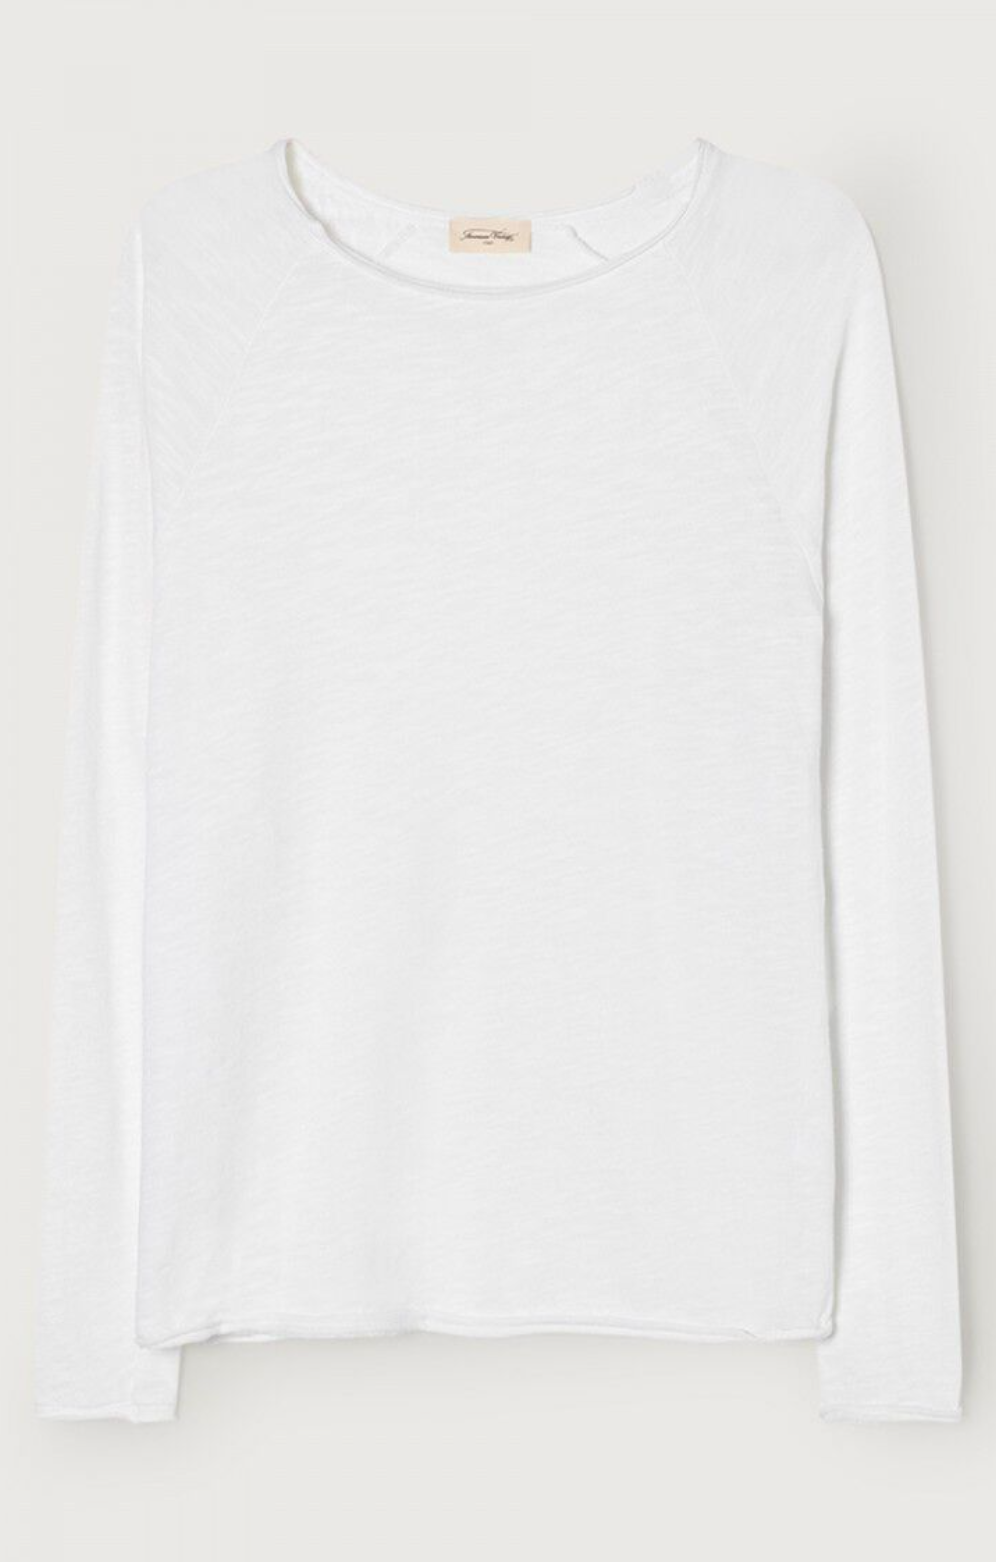 A flat lay image of the front of the Sonoma Long Sleeve in white 